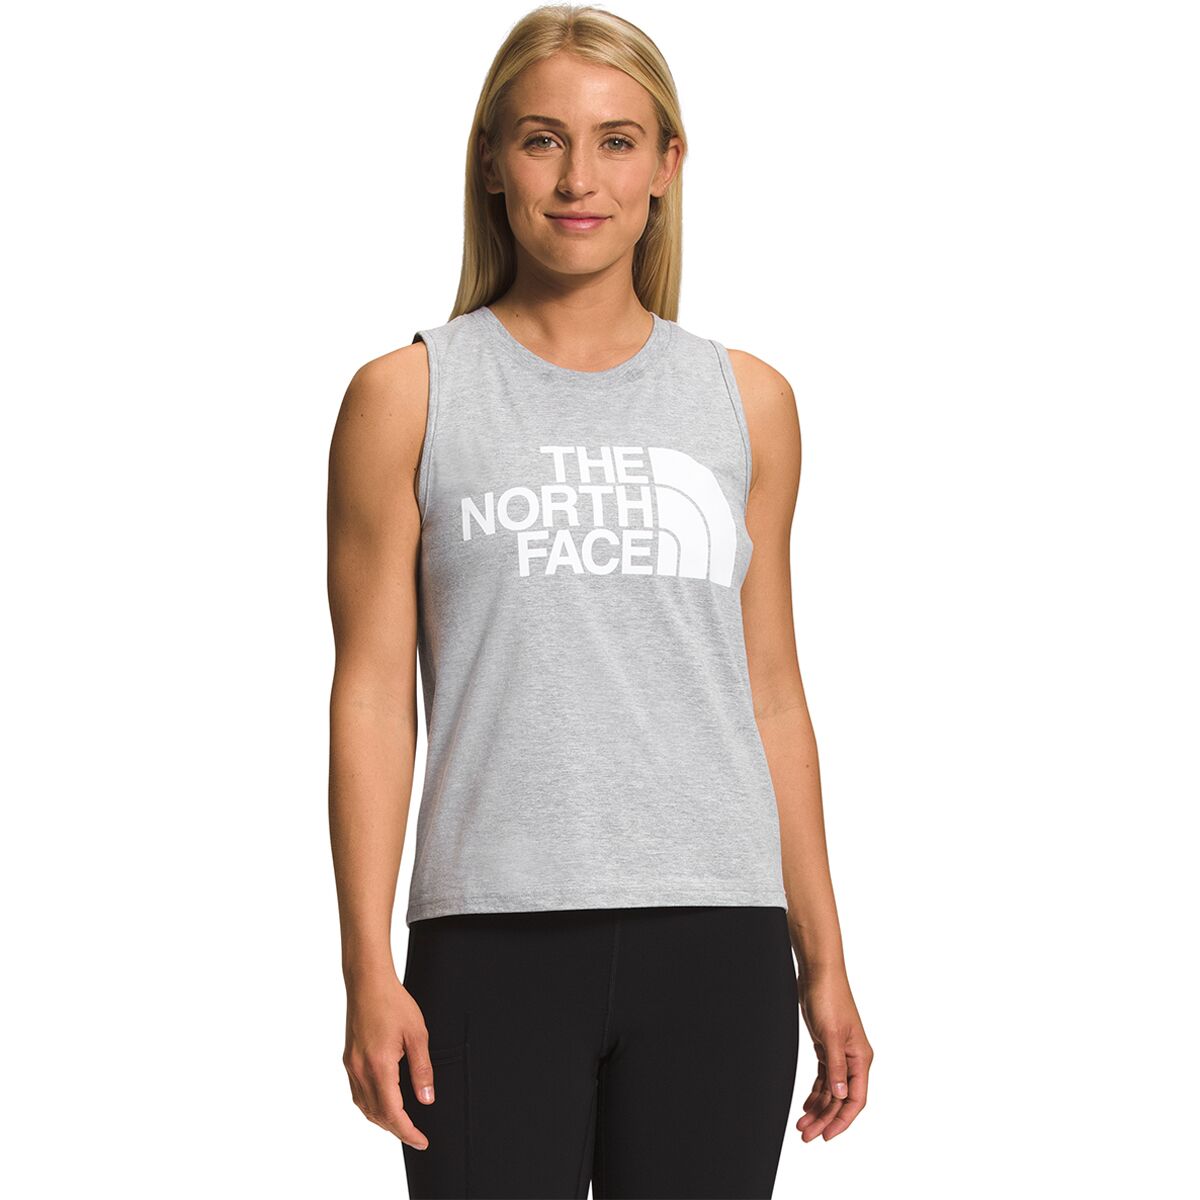 The North Face Half Dome Tank Top - Women's